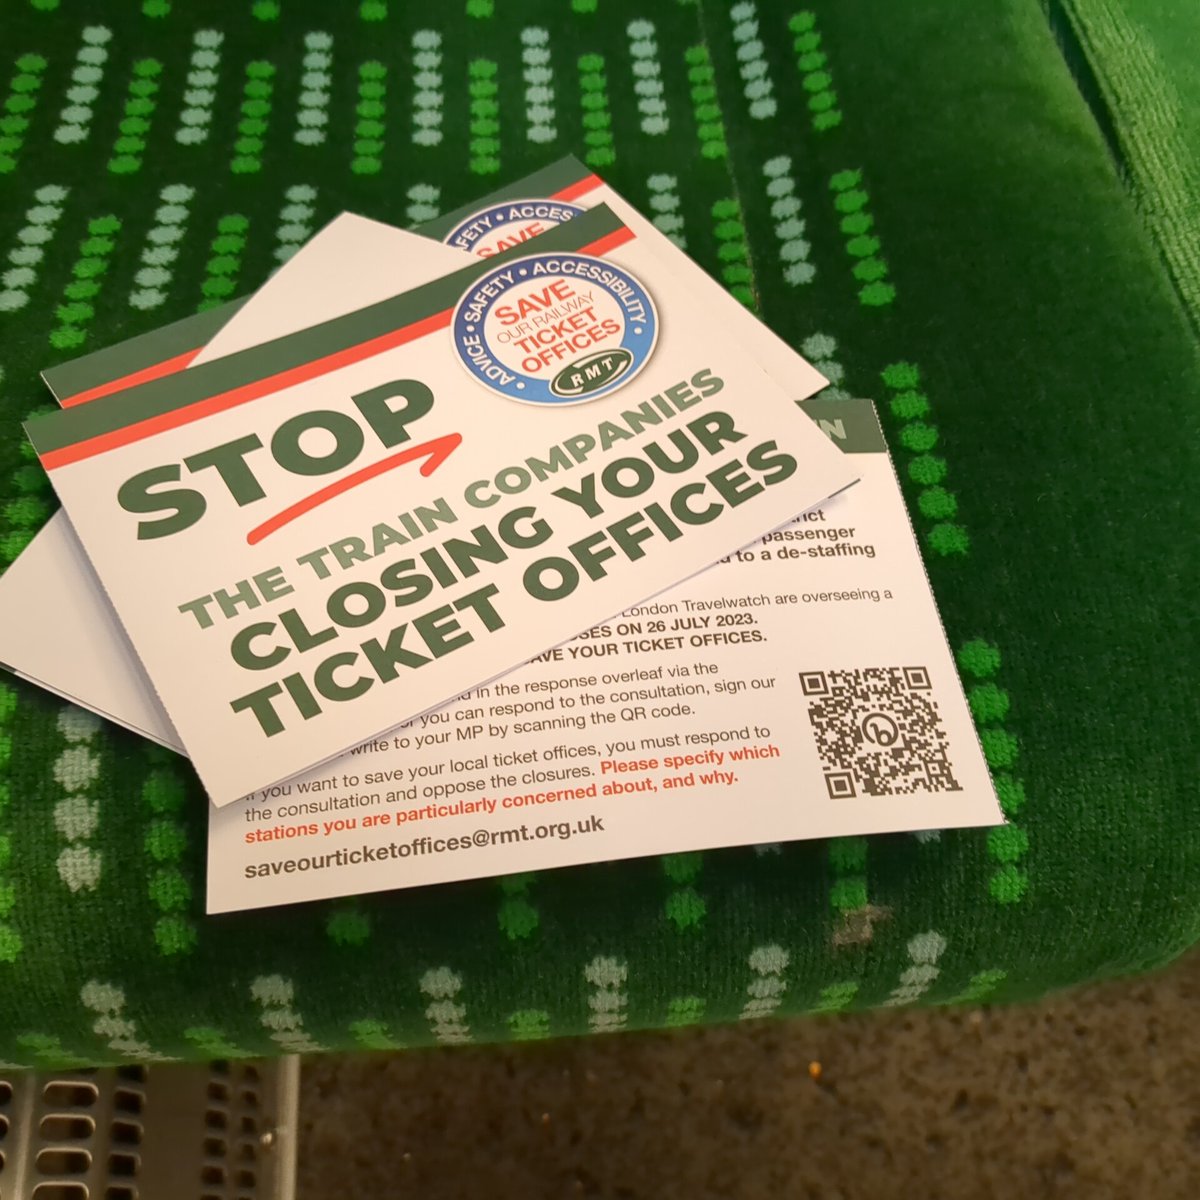 RT @natashamillward: Just picked up these @RMTunion flyers.  Filling mine in now
 #Solidarity #SaveTicketOffices https://t.co/X9sYpPpobz